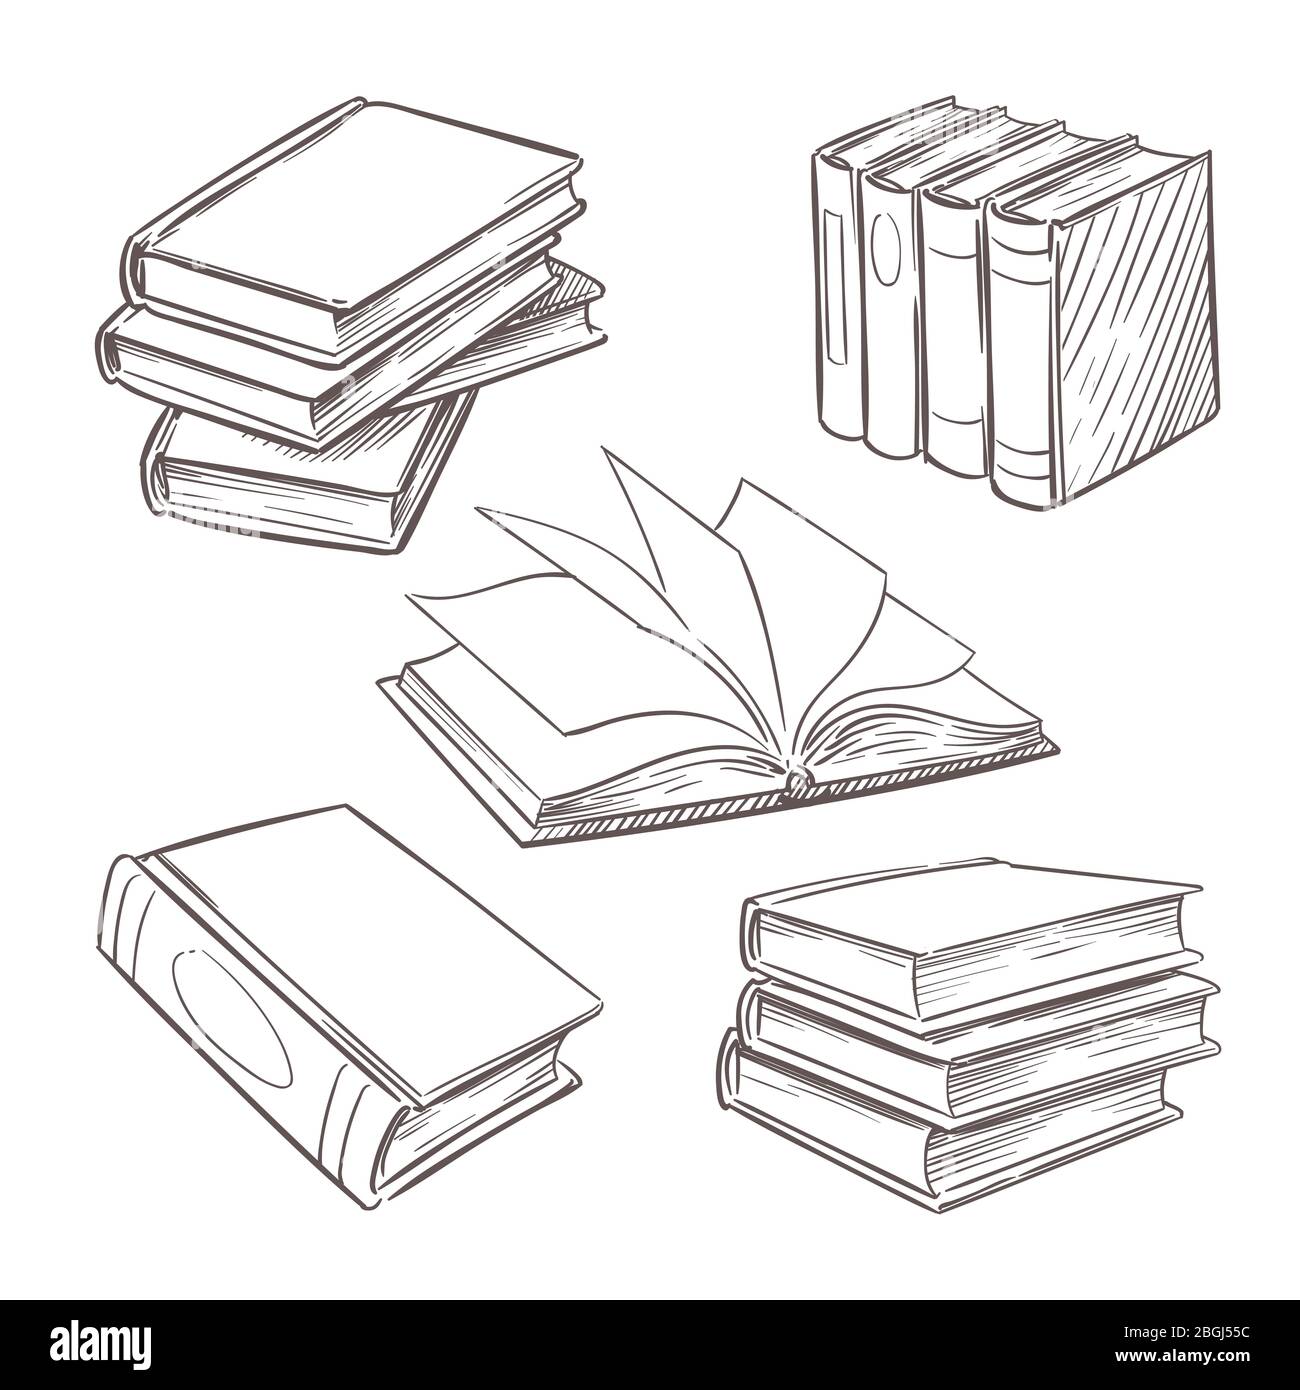 Hand drawn vintage books. Sketch book piles. Library, bookshop vector retro design elements isolated on white background. Illustration of literature for study read Stock Vector